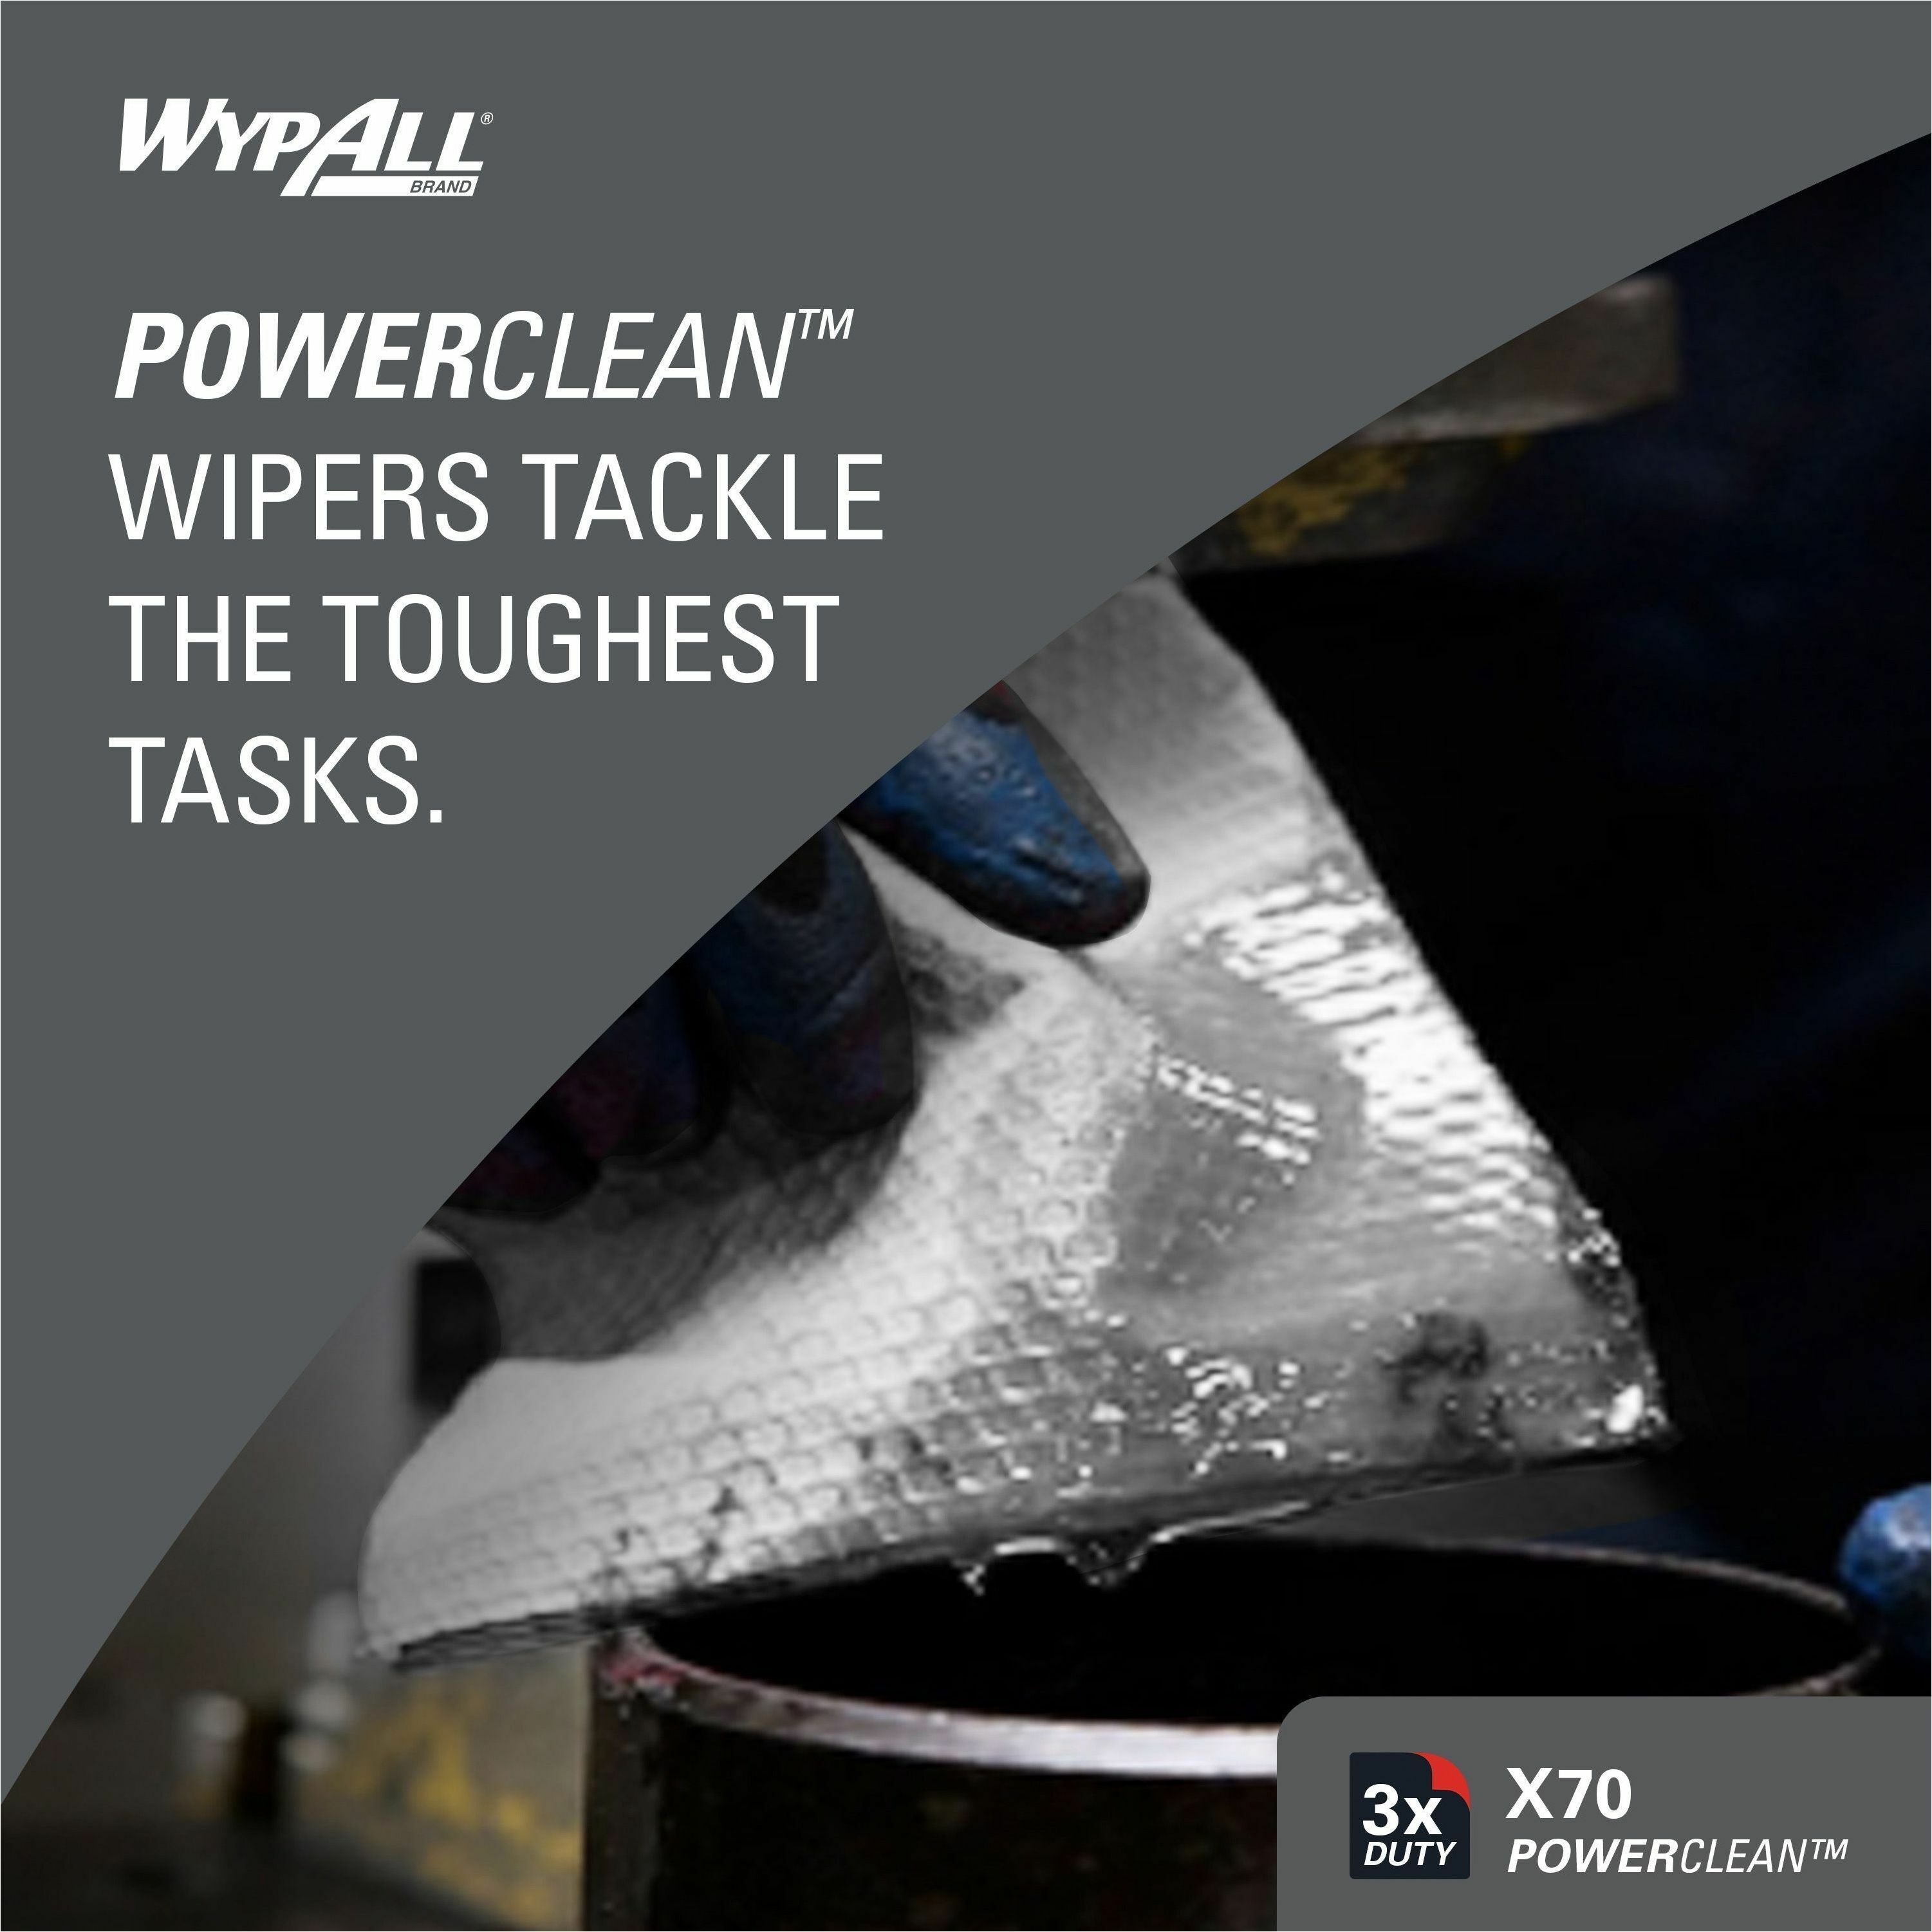 wypall-powerclean-x70-medium-duty-cloths-pop-up-box-834-x-1680-white-hydroknit-durable-absorbent-strong-reusable-embossed-for-multipurpose-100-per-box-1000-carton_kcc41455ct - 2